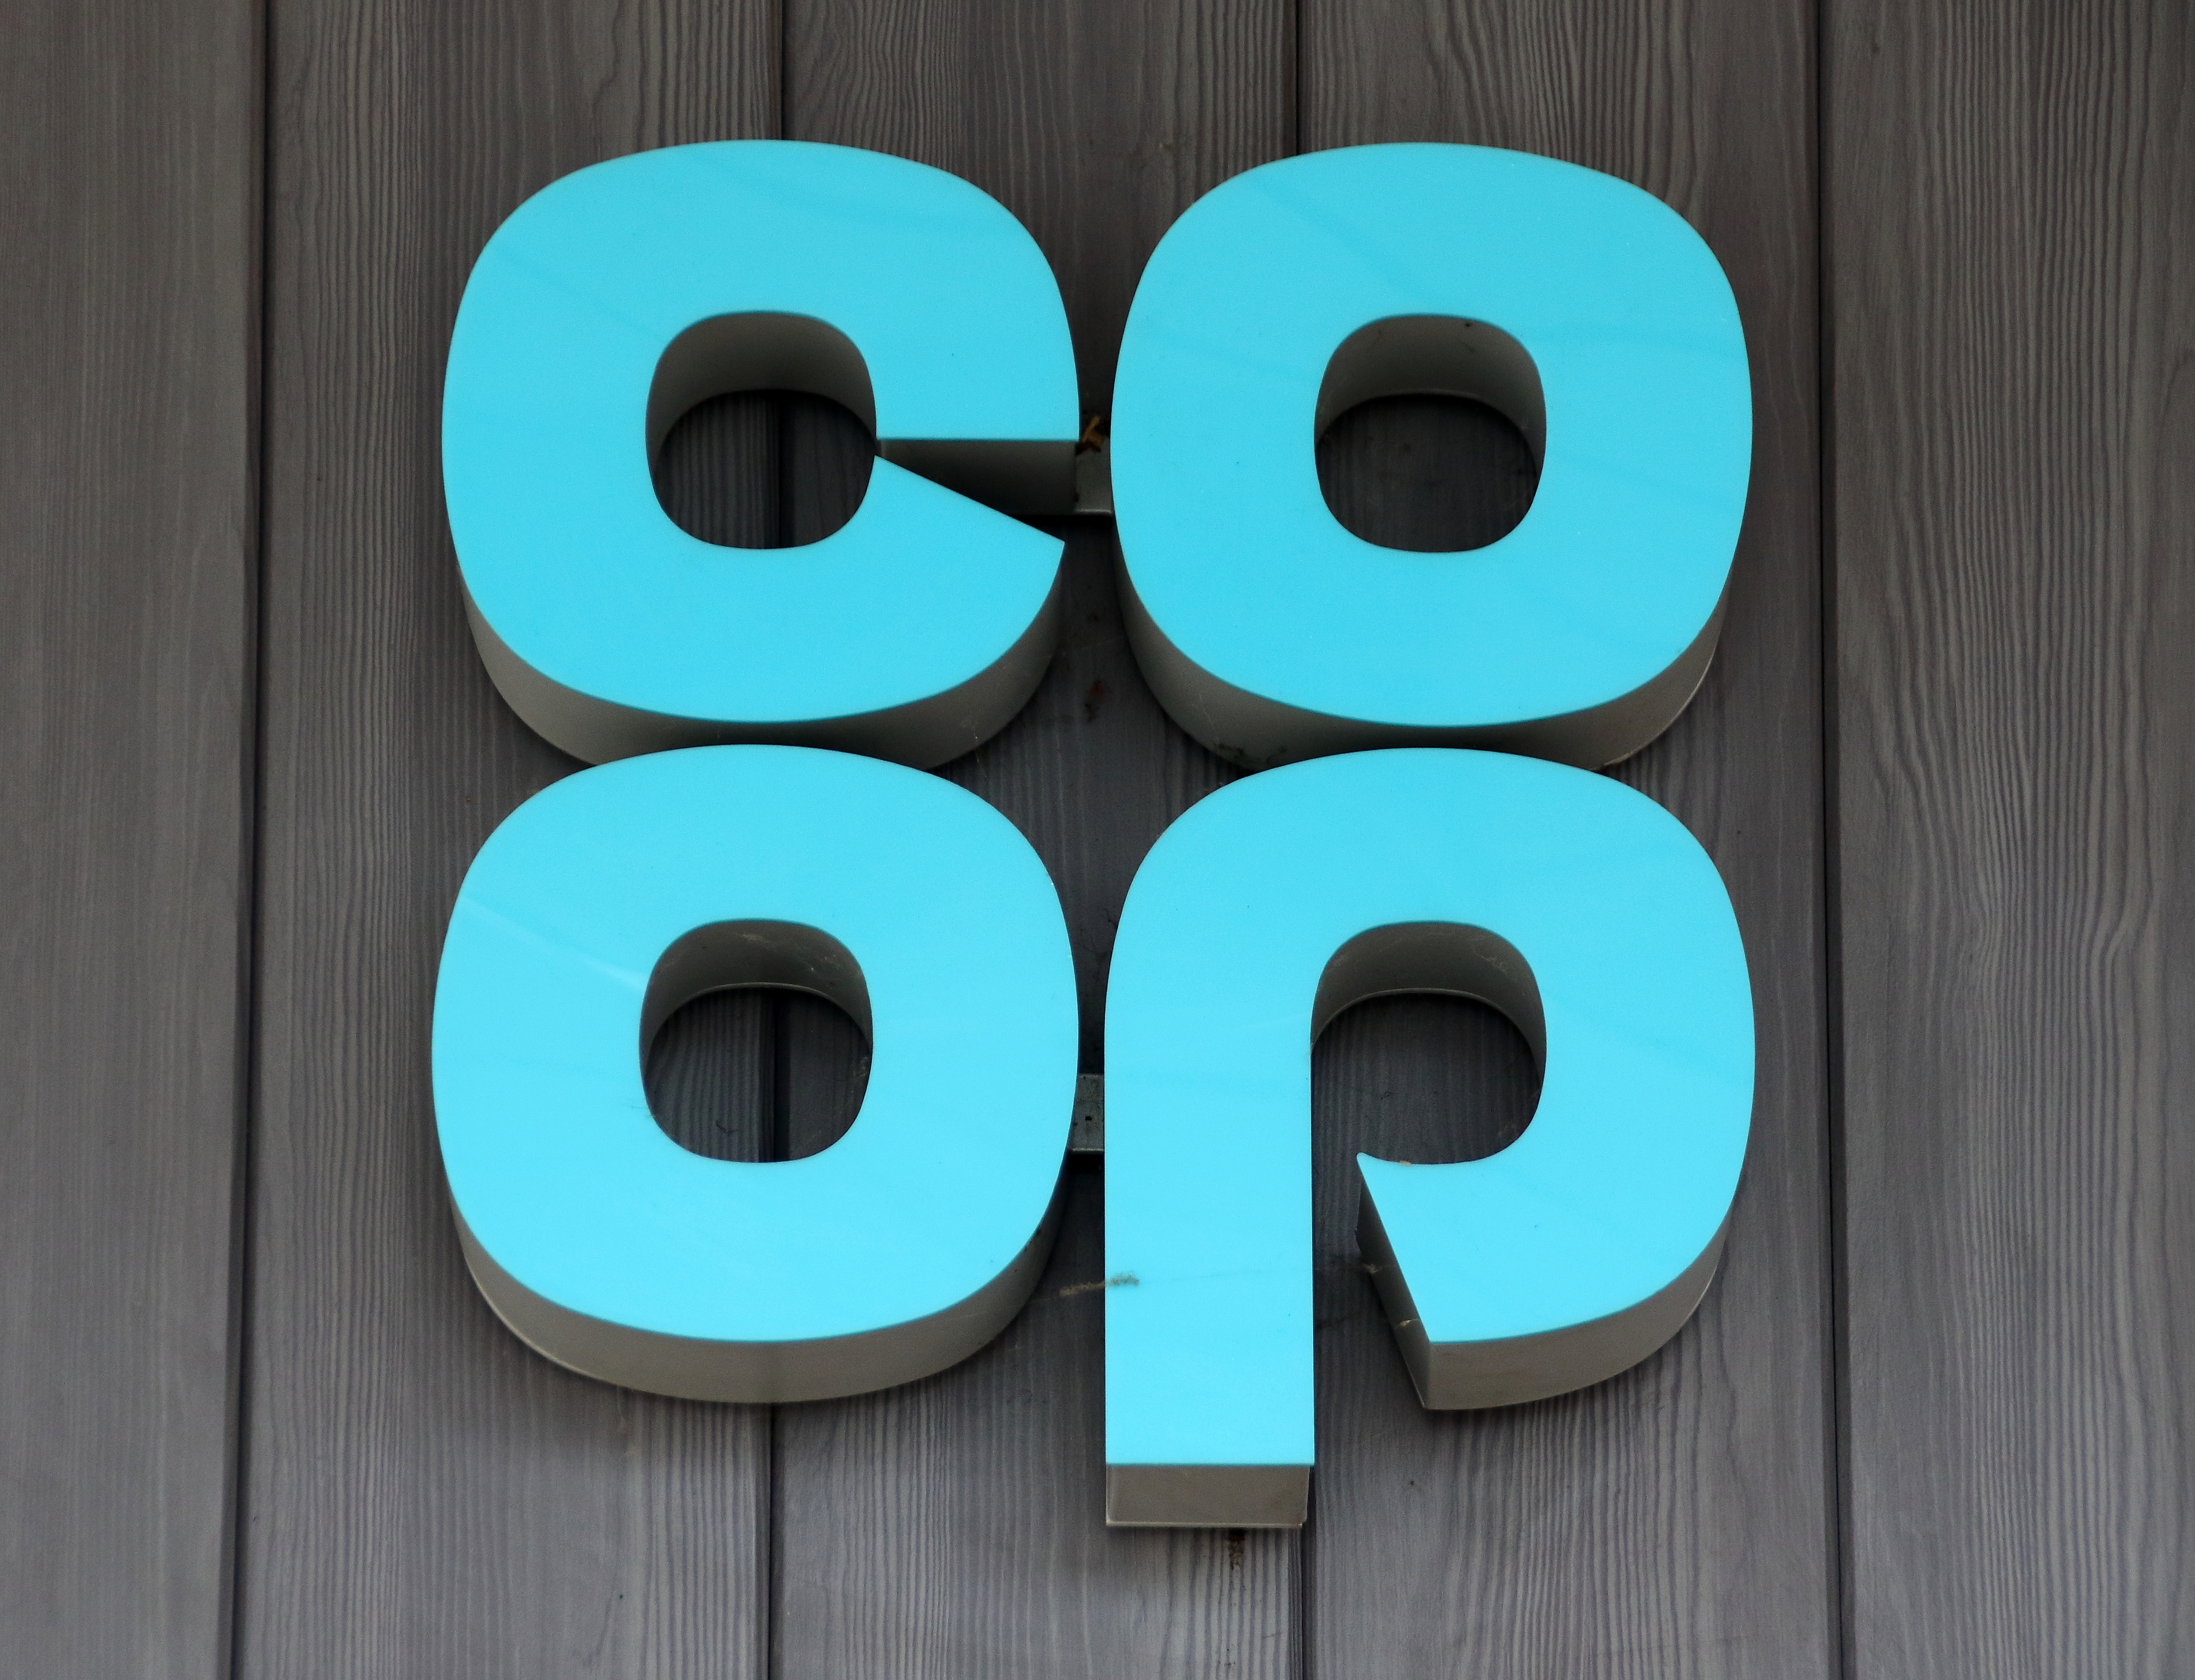 It was announced one of Bristol's Co-Op stores would be closing last month